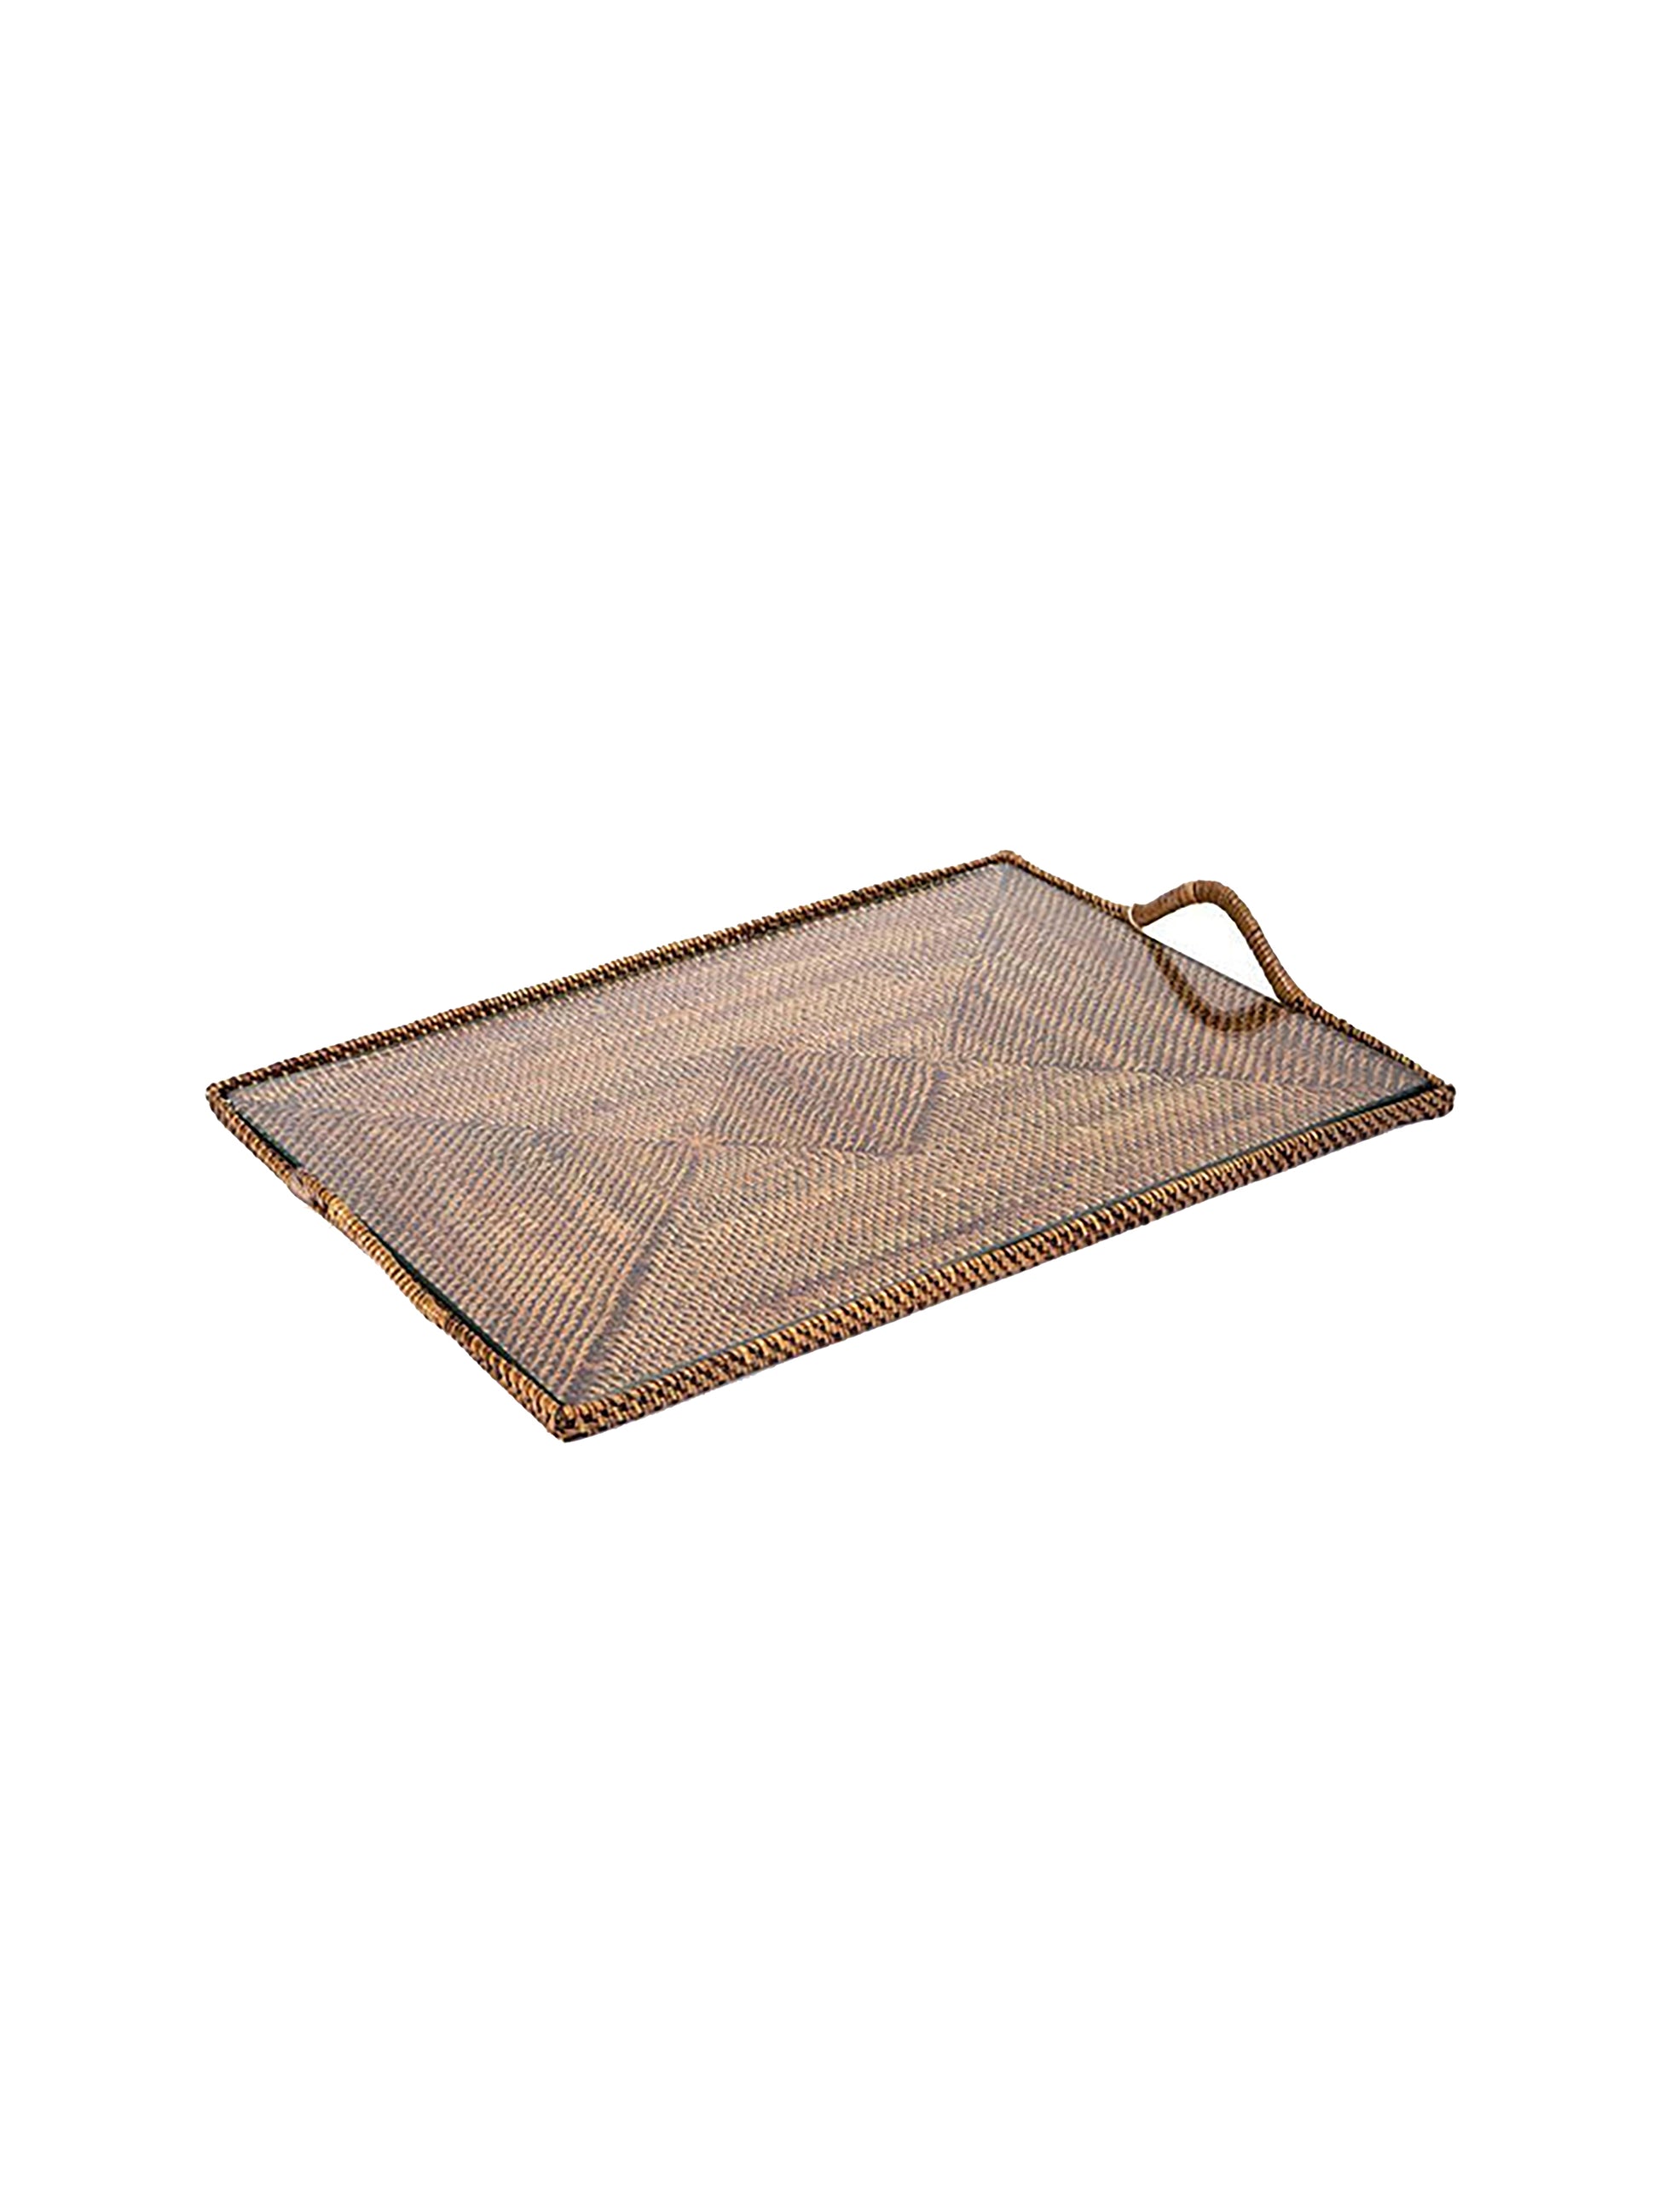 Calaisio Rectangular Serving Tray with Glass Bottom Weston Table